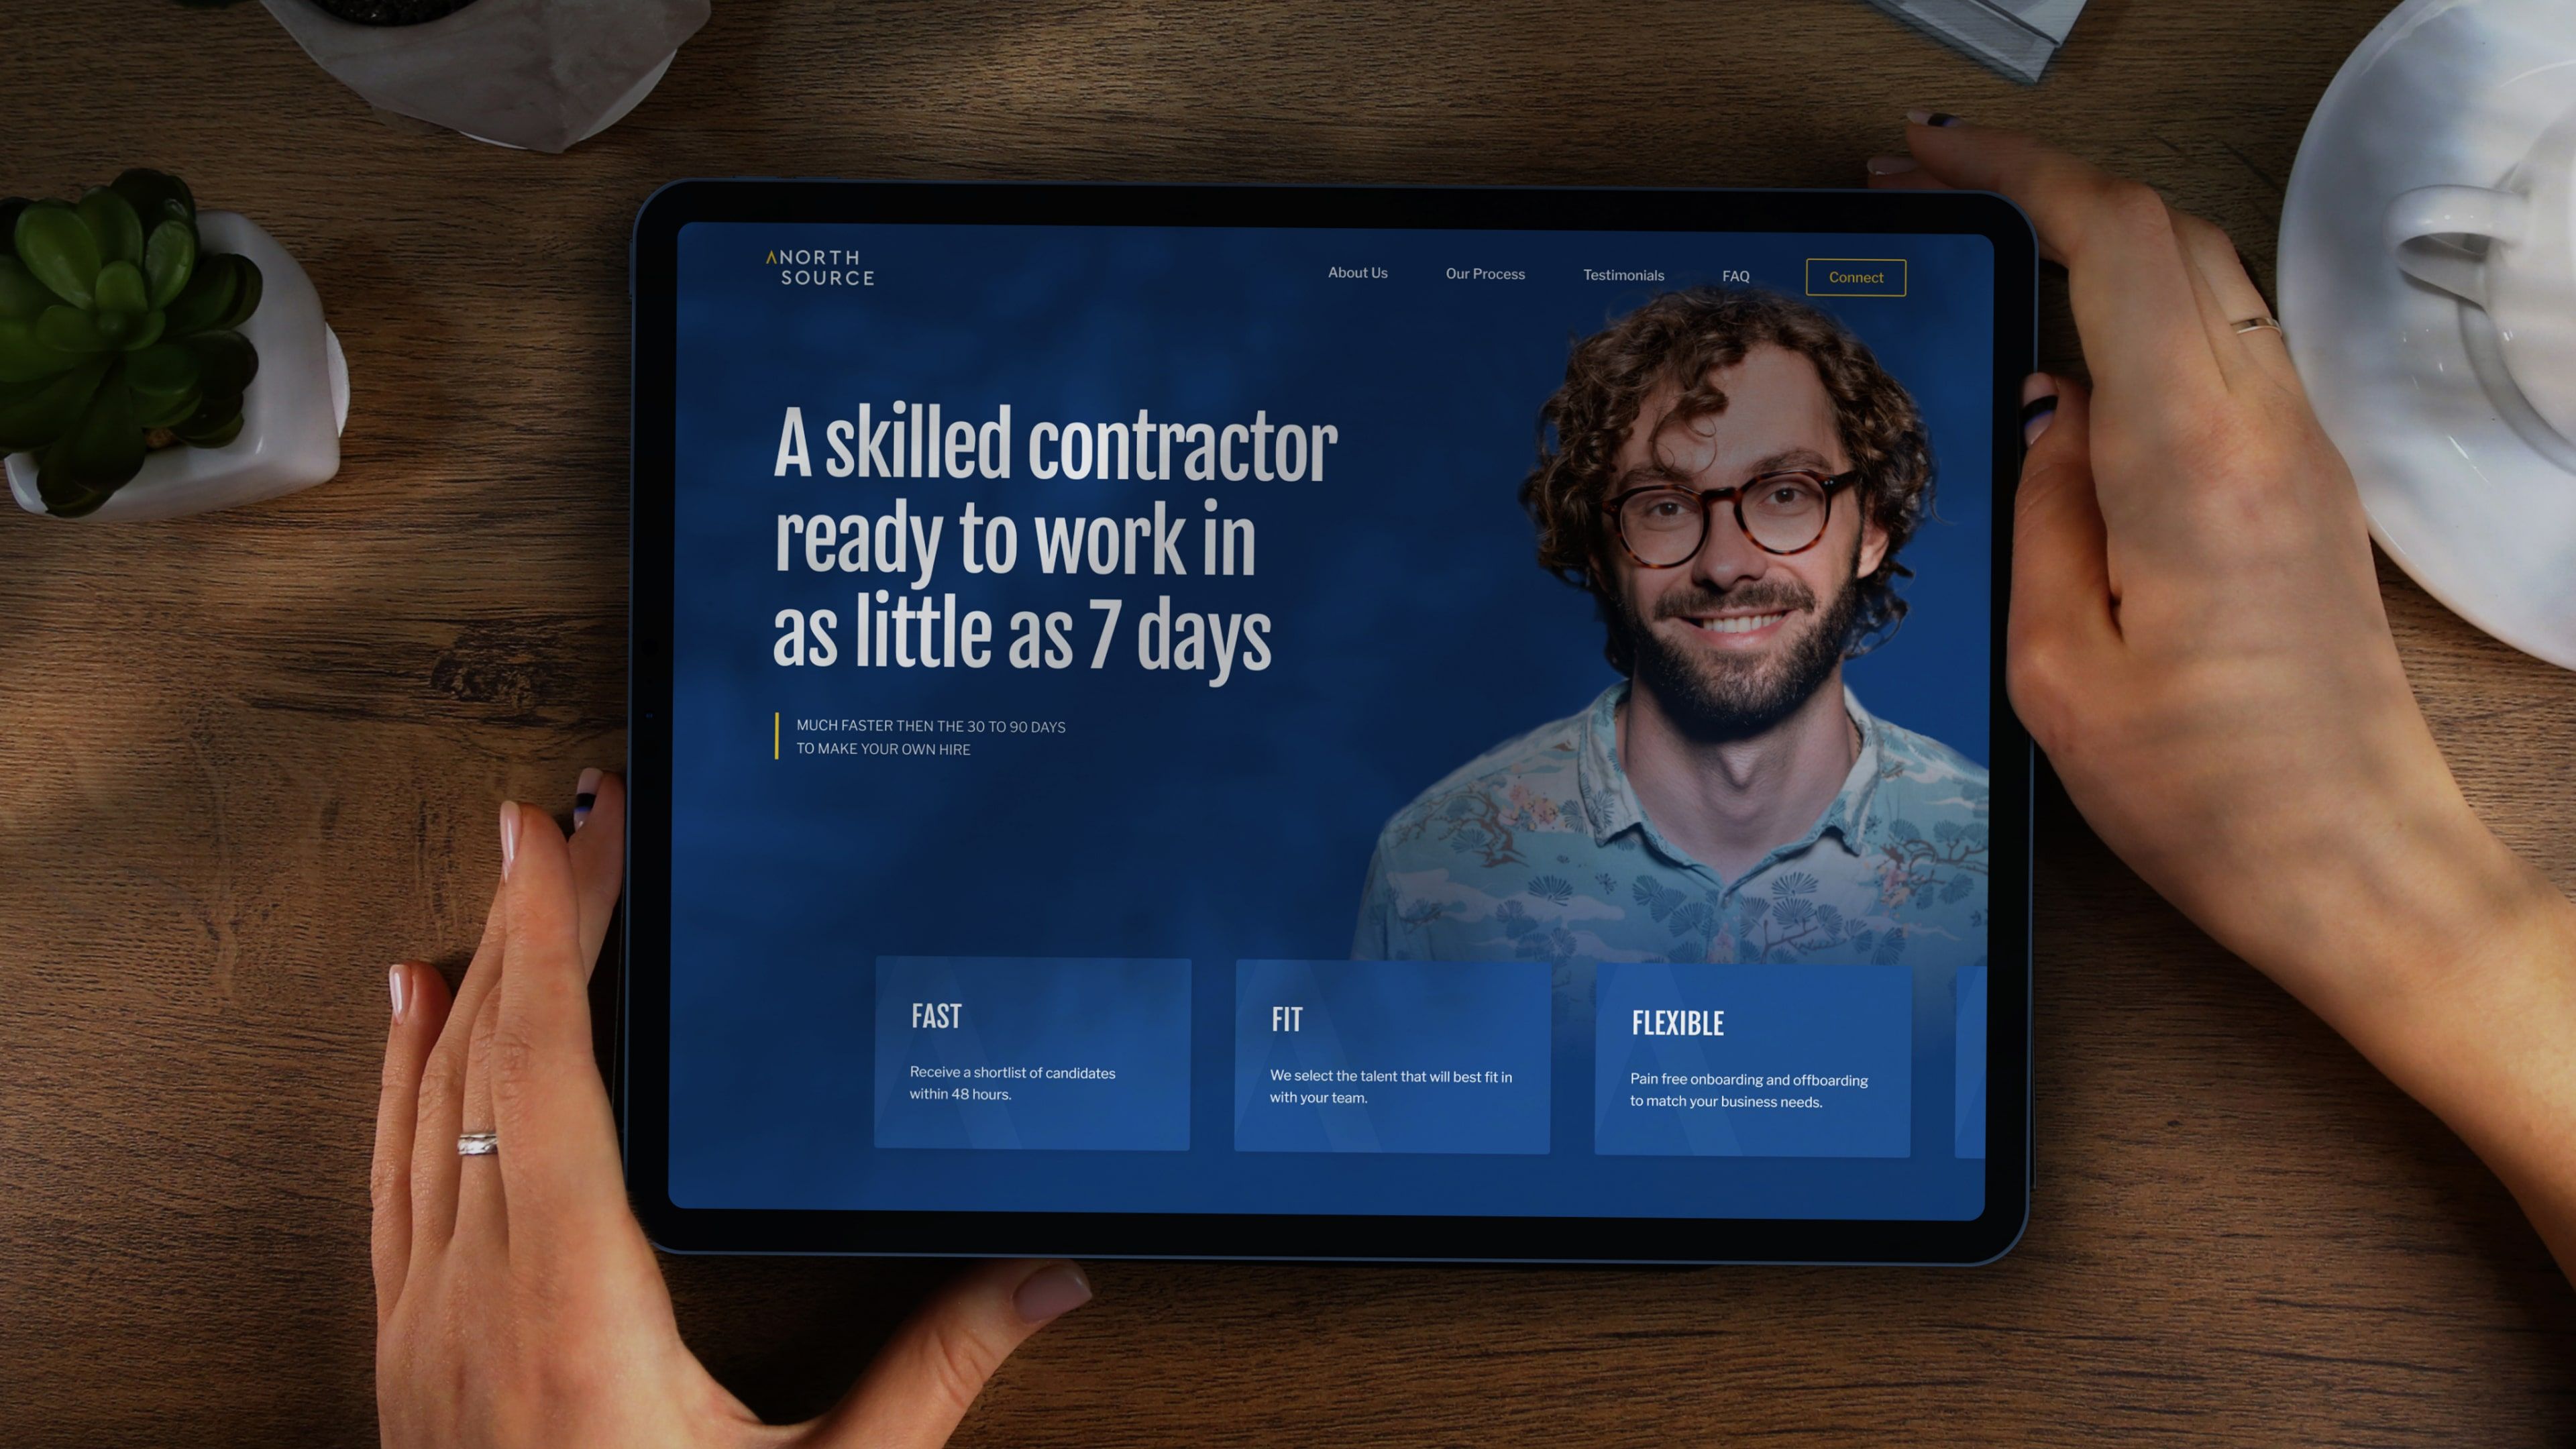 Northsource skilled contractor section tablet view